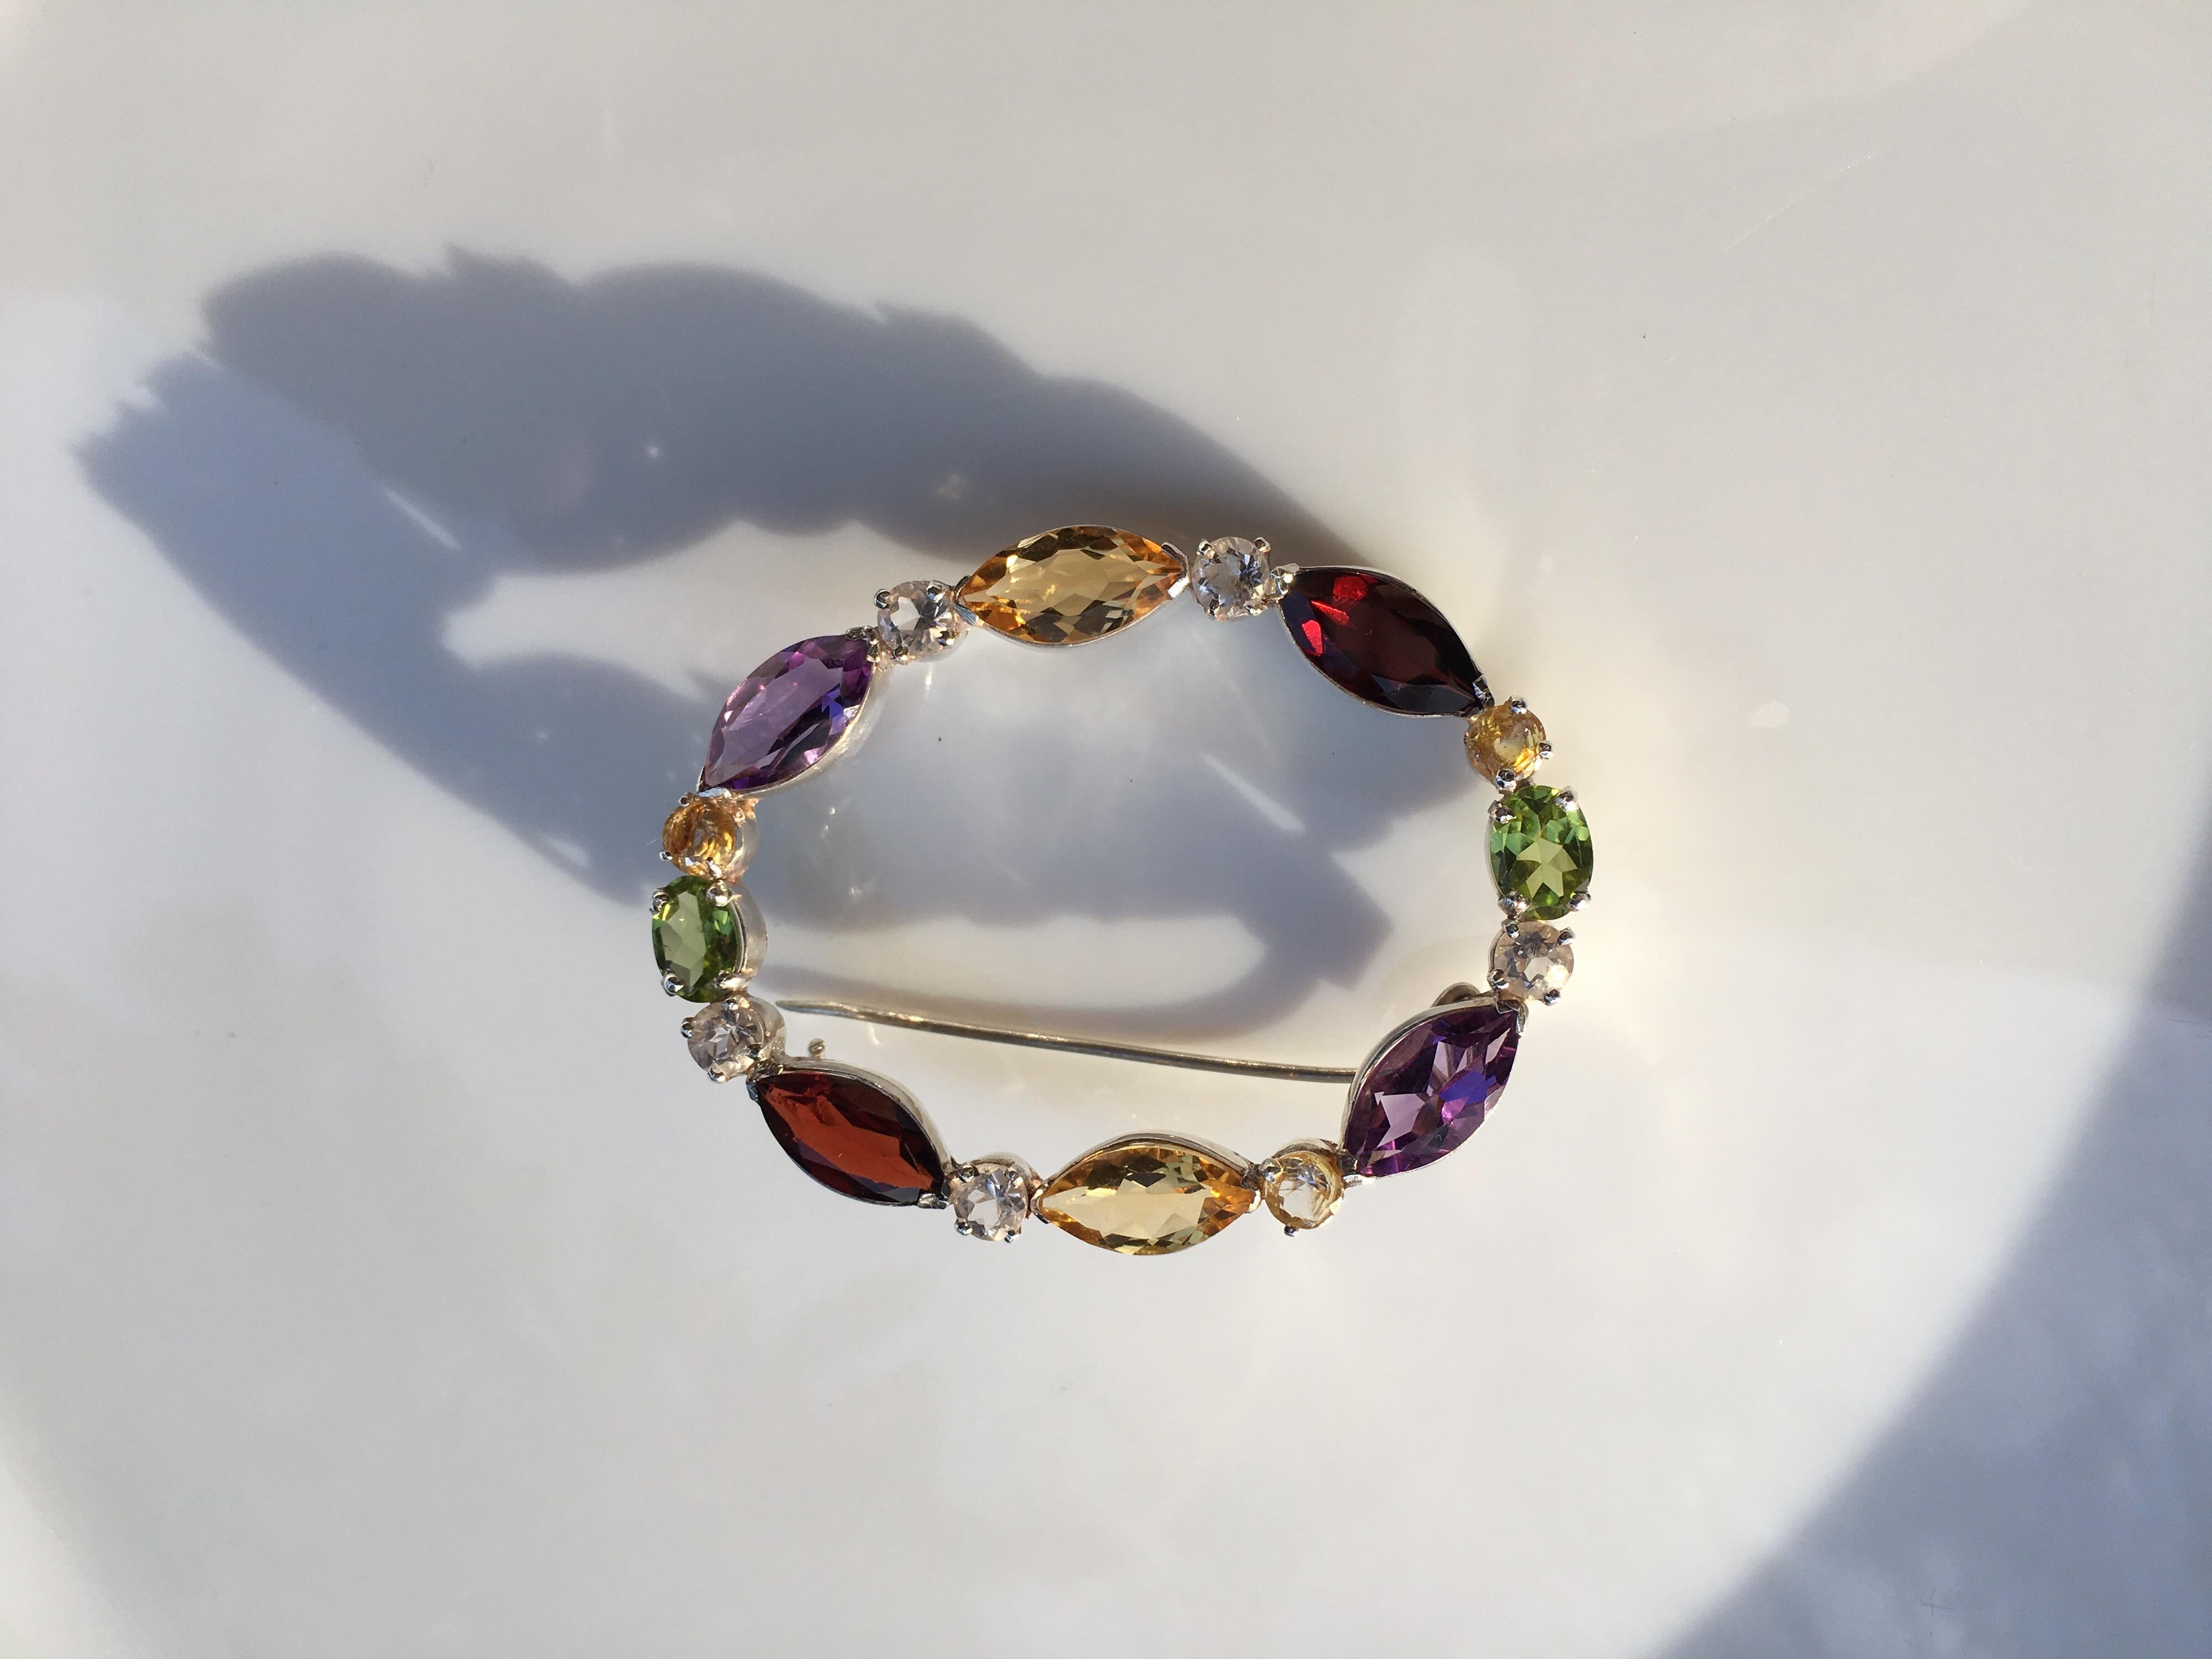 Natural Semi precious stones Garnet, Rock crystal, Peridot, Citrine, Ameythest set in sterling silver is handcrafted one of a kind Brooch.Size of Marquise shapes stone are  5 MM x 10 MM , Oval Peridot is 5 MM X 7 MM and All round crystal and Citrine